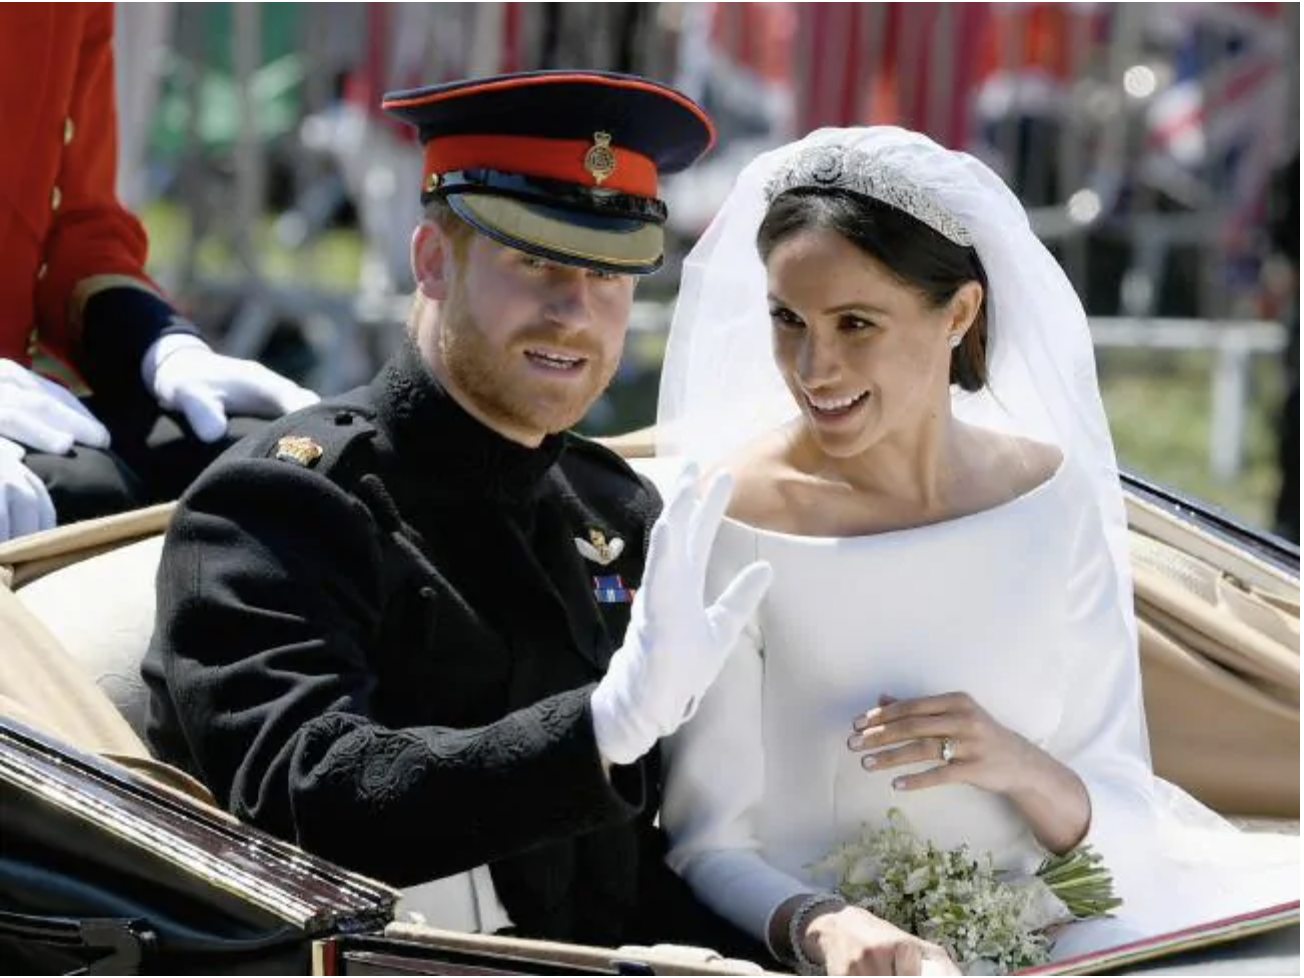 Harry and Meghan’s wedding cost $62 million, much more than William and Kate’s much bigger affair. Picture: Jeff J Mitchell/Getty Images Harry and Meghan’s wedding cost $62 million, much more than William and Kate’s much bigger affair. Picture: Jeff J Mitchell/Getty ImagesSource:Getty Images